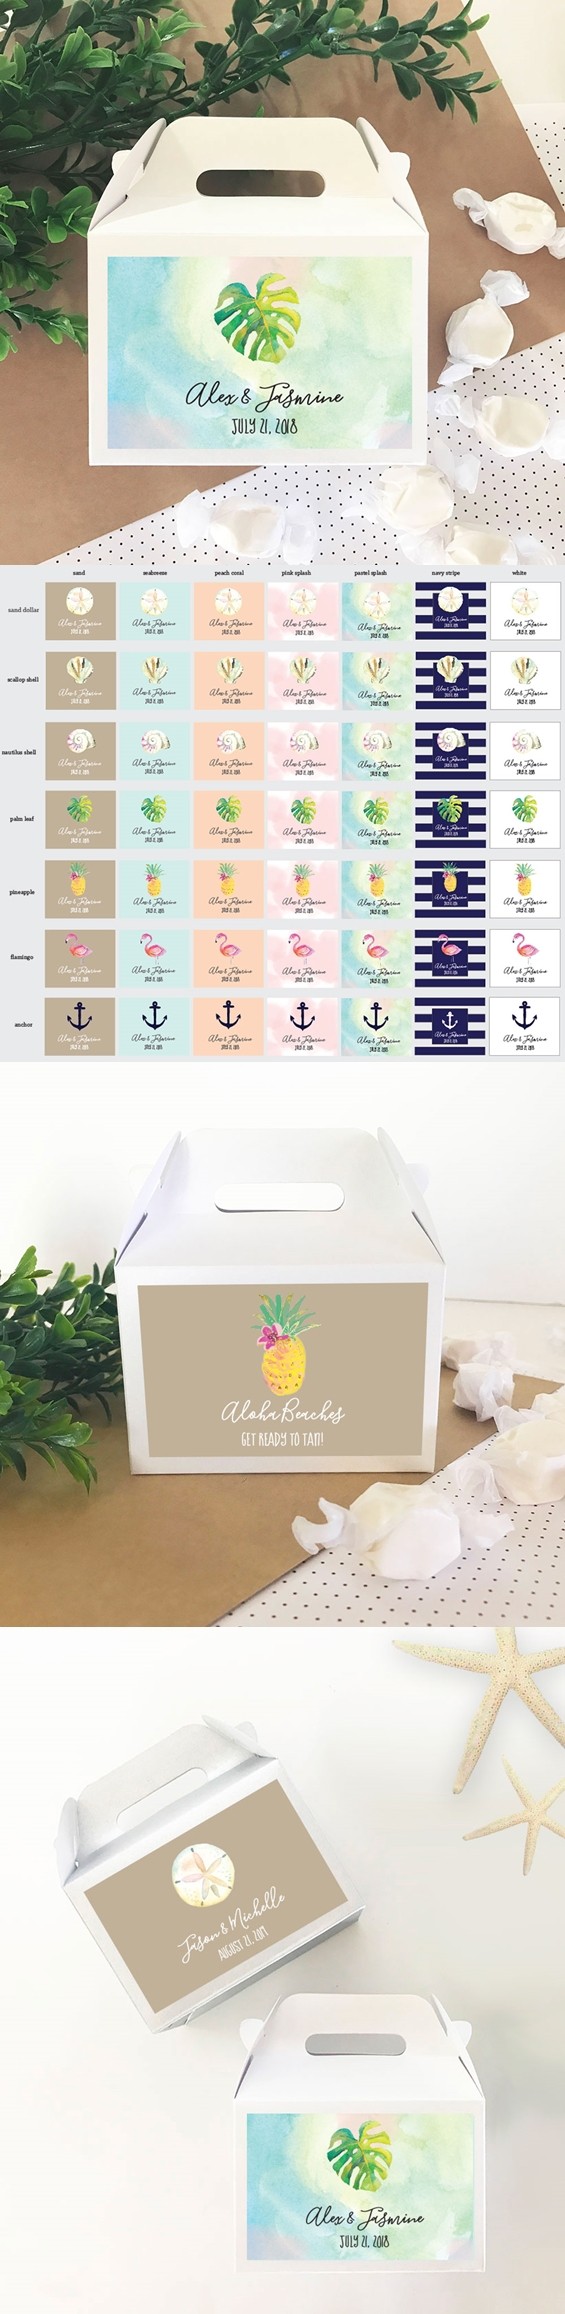 Personalized Mini Gable Boxes with Tropical Beach Designs (Set of 12)